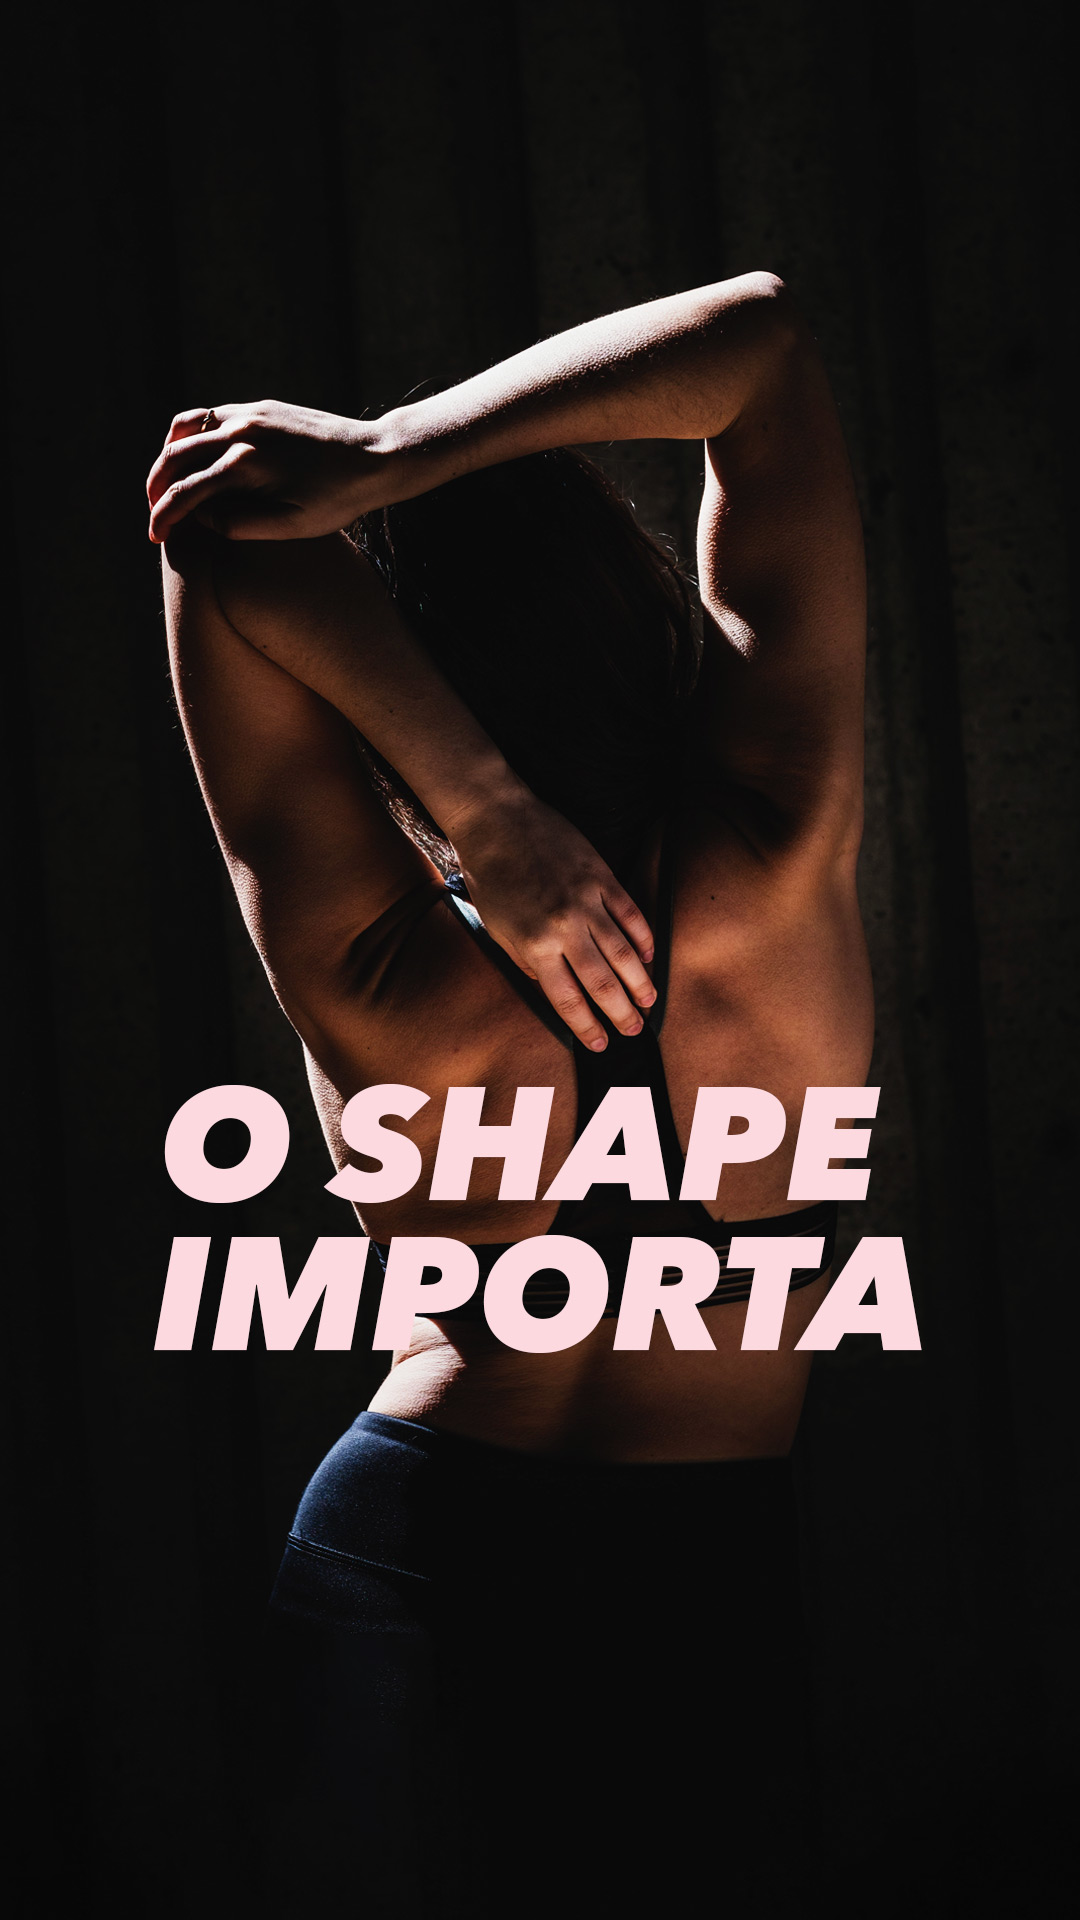 You are currently viewing O shape importa.